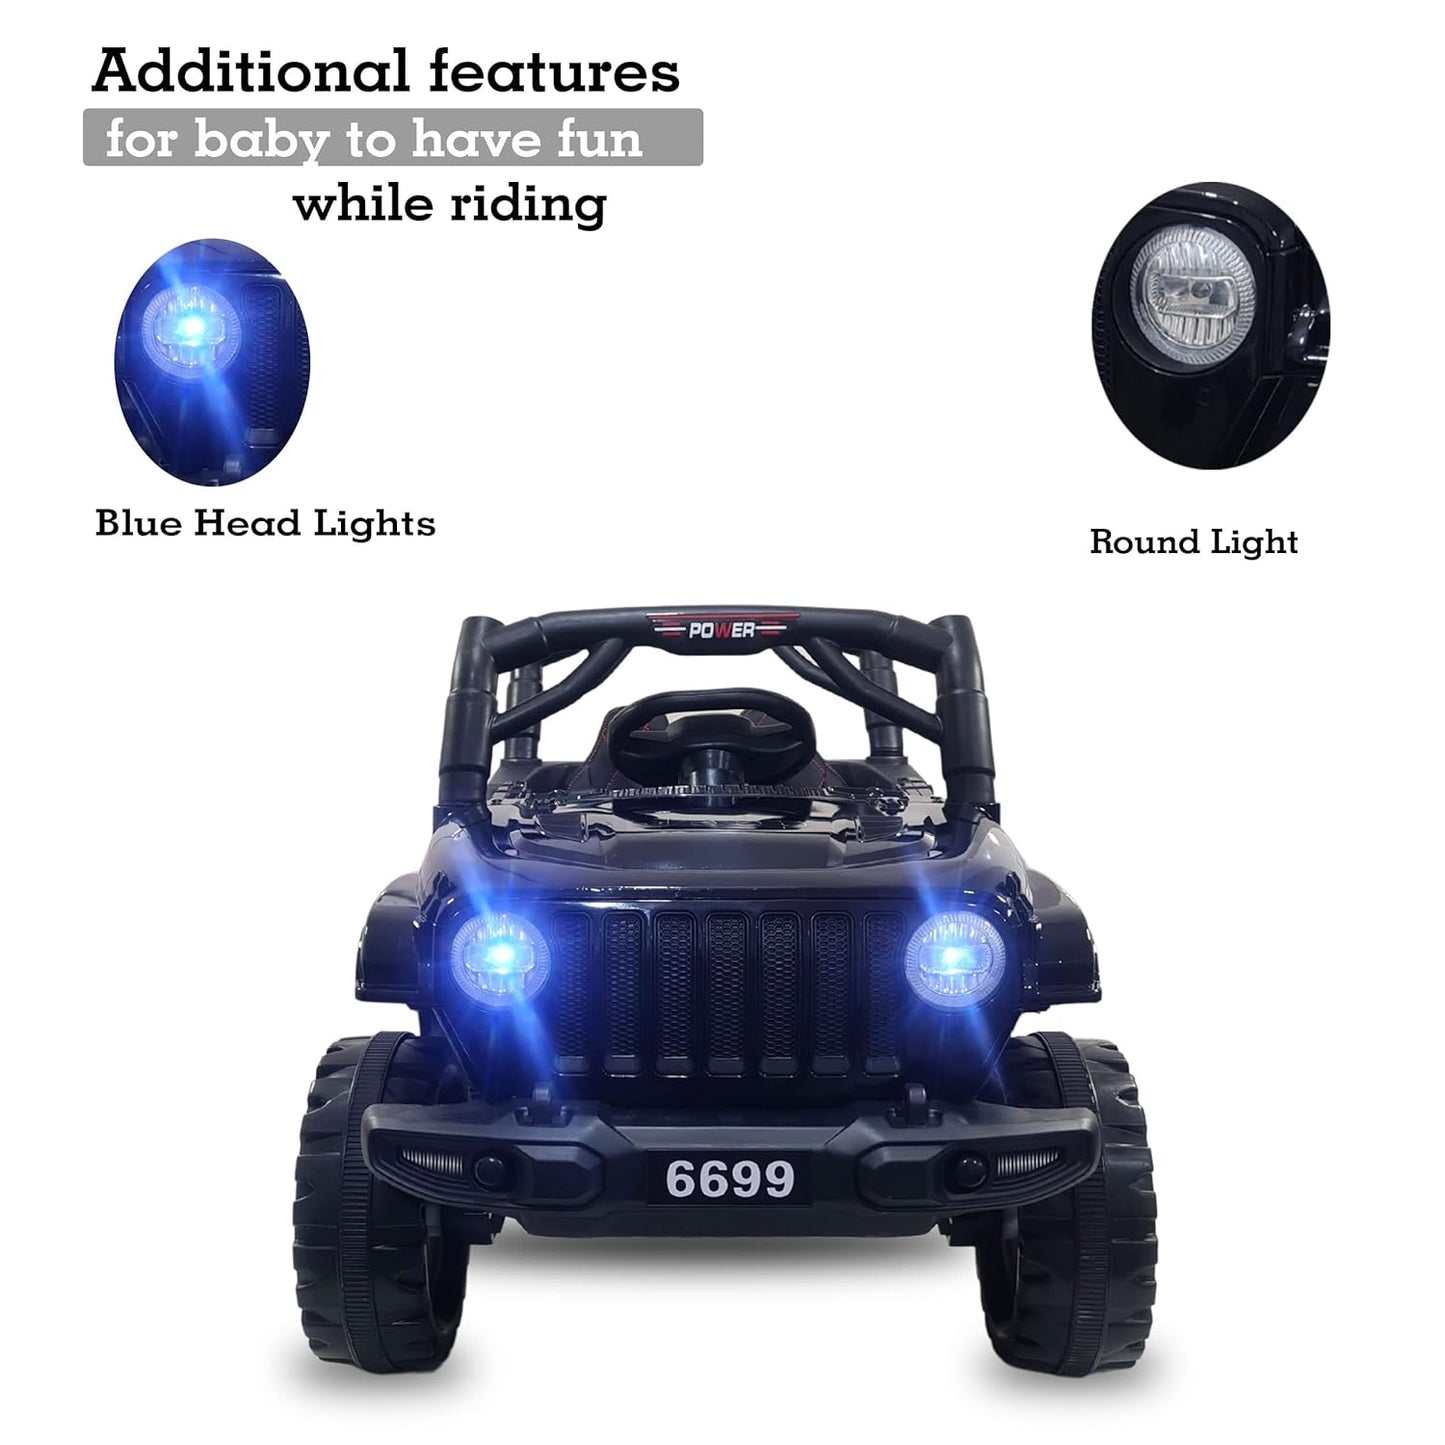 GettBoles 908 Electric Ride on Jeep for Kids with Music, Led Lights, Swing, Bluetooth Remote and 12V Battery Operated Car for1 to 4 Years Children to Drive (Metallic Black